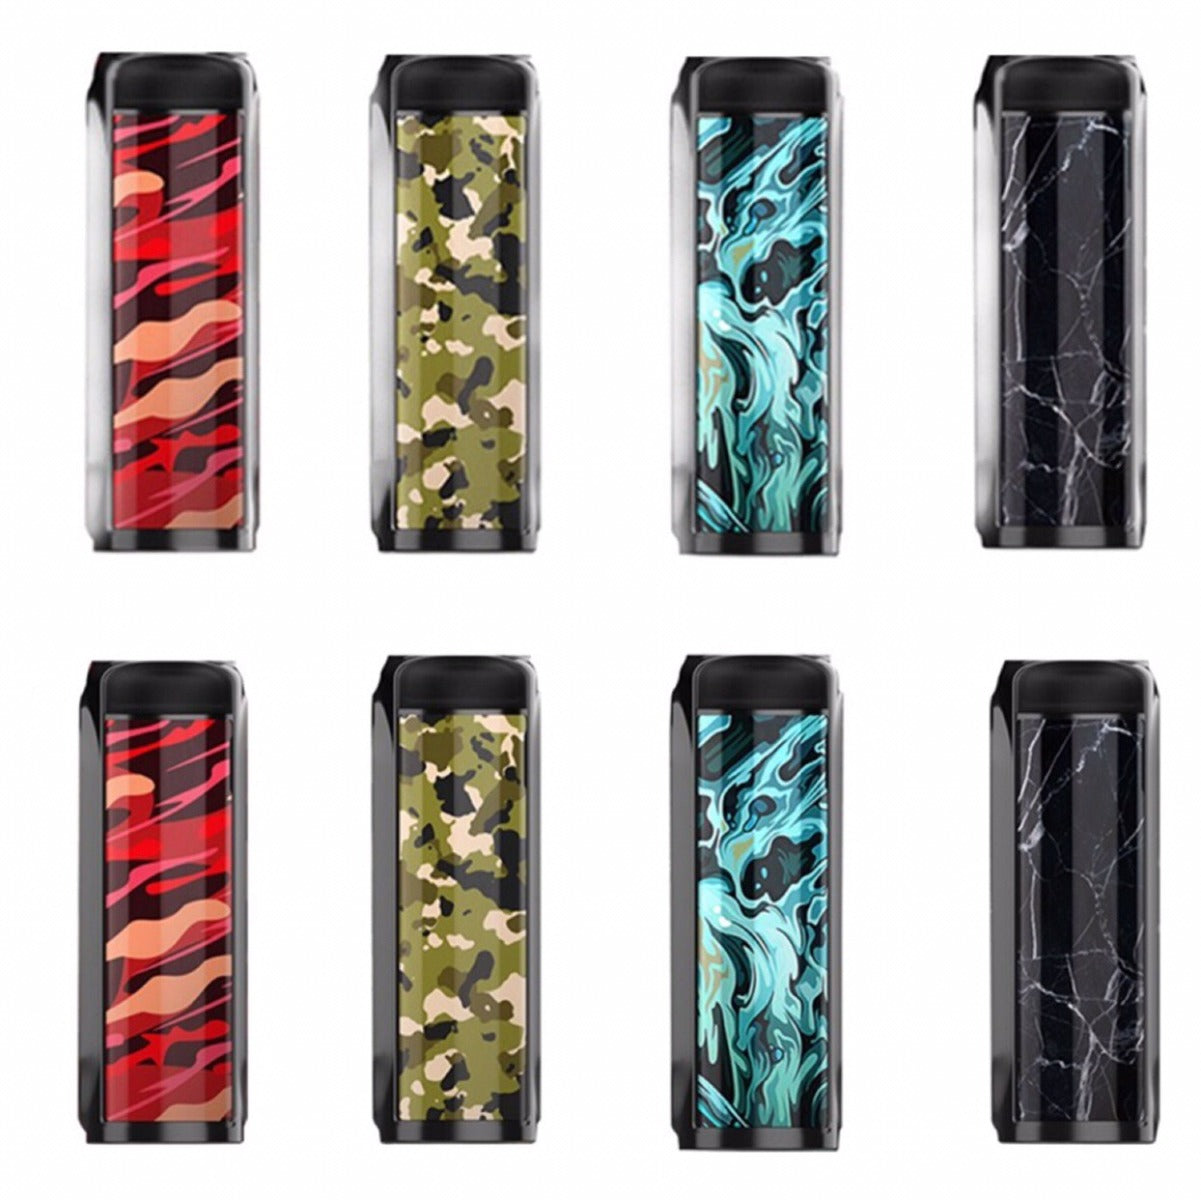 VOOPOO VMATE 200W TC Box Mod by dual 18650 batteries